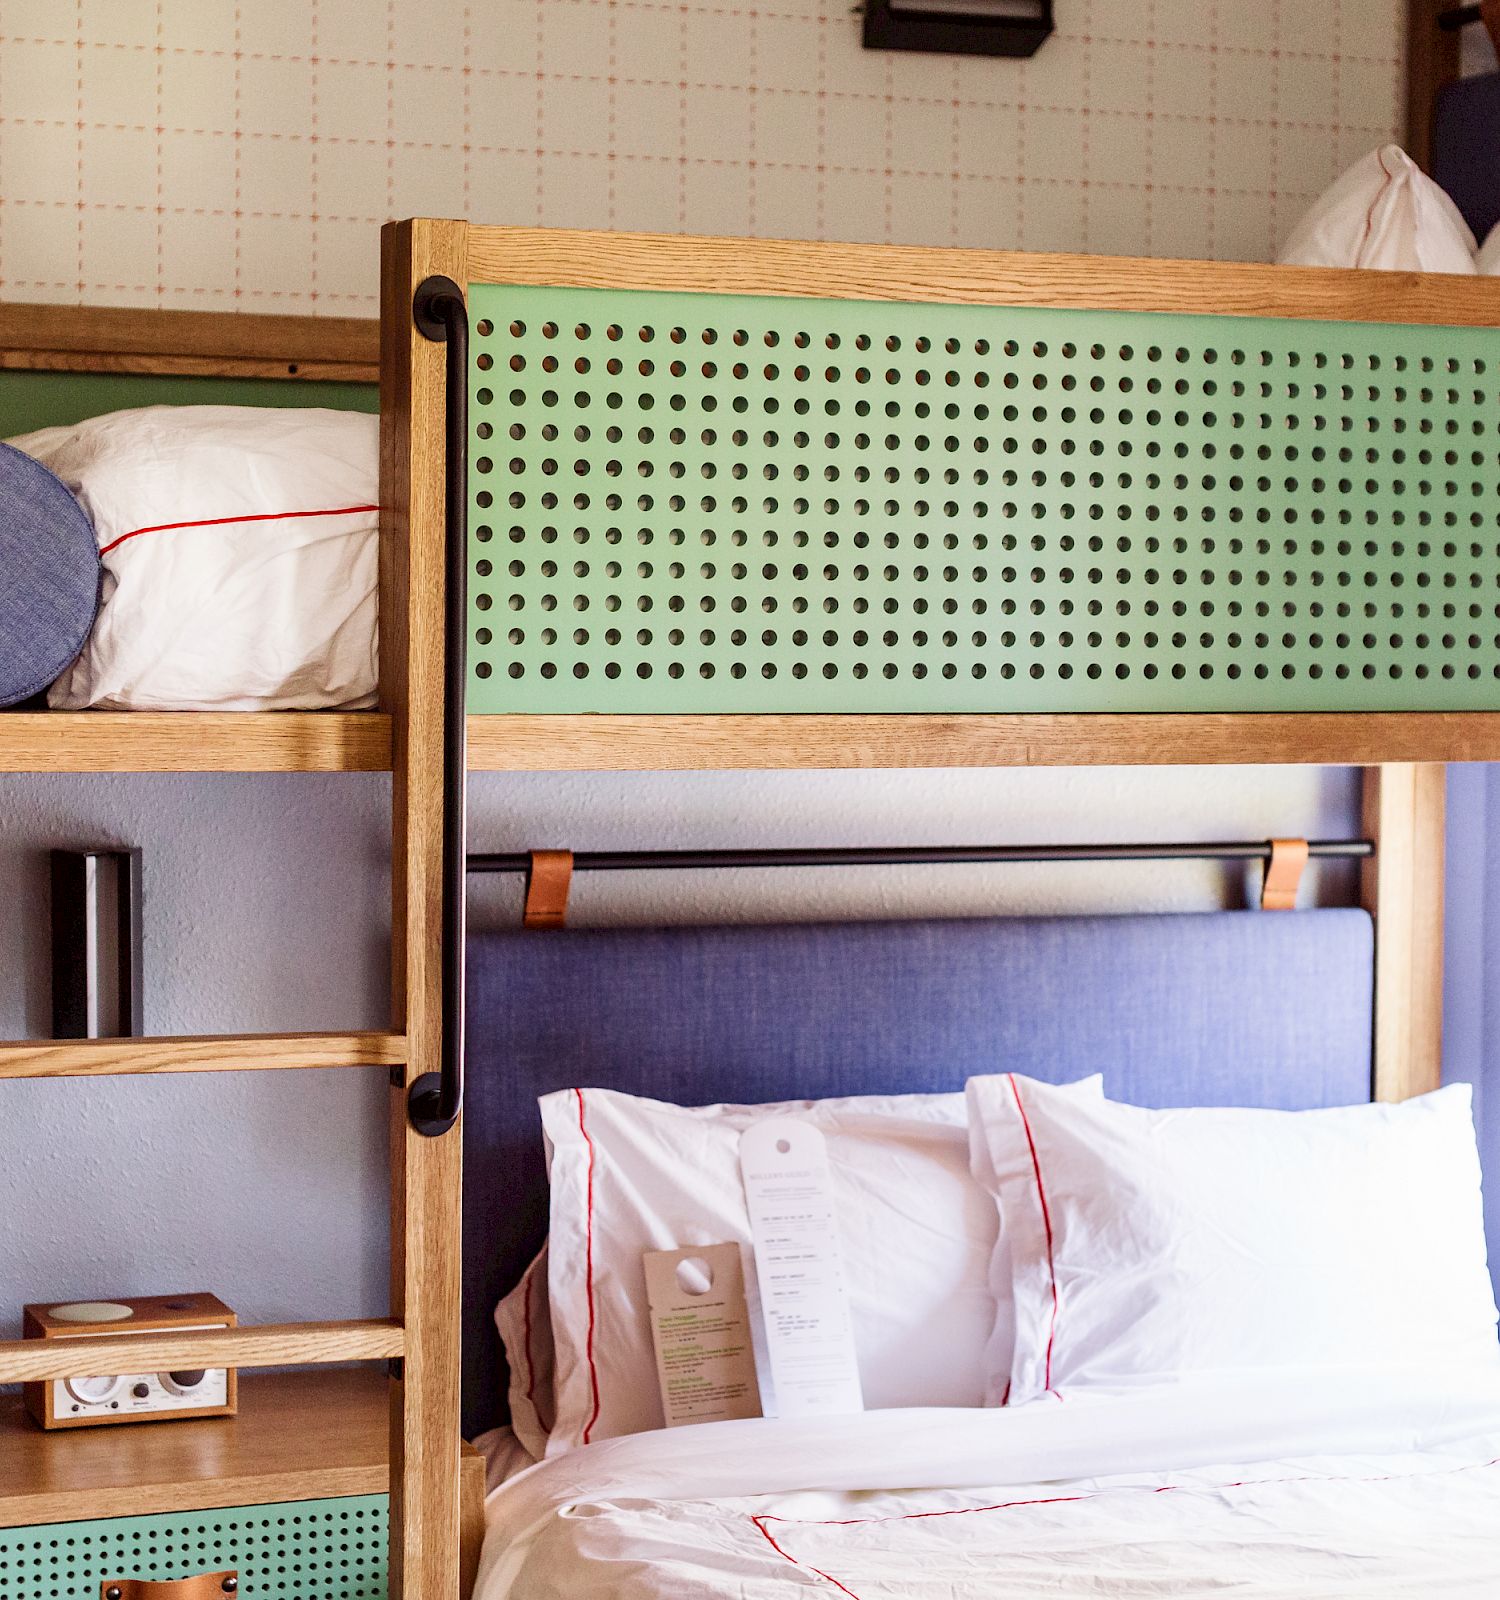 The image shows a modern bunk bed setup with a lower double bed, upper single bed, built-in shelving, and a window beside the beds.